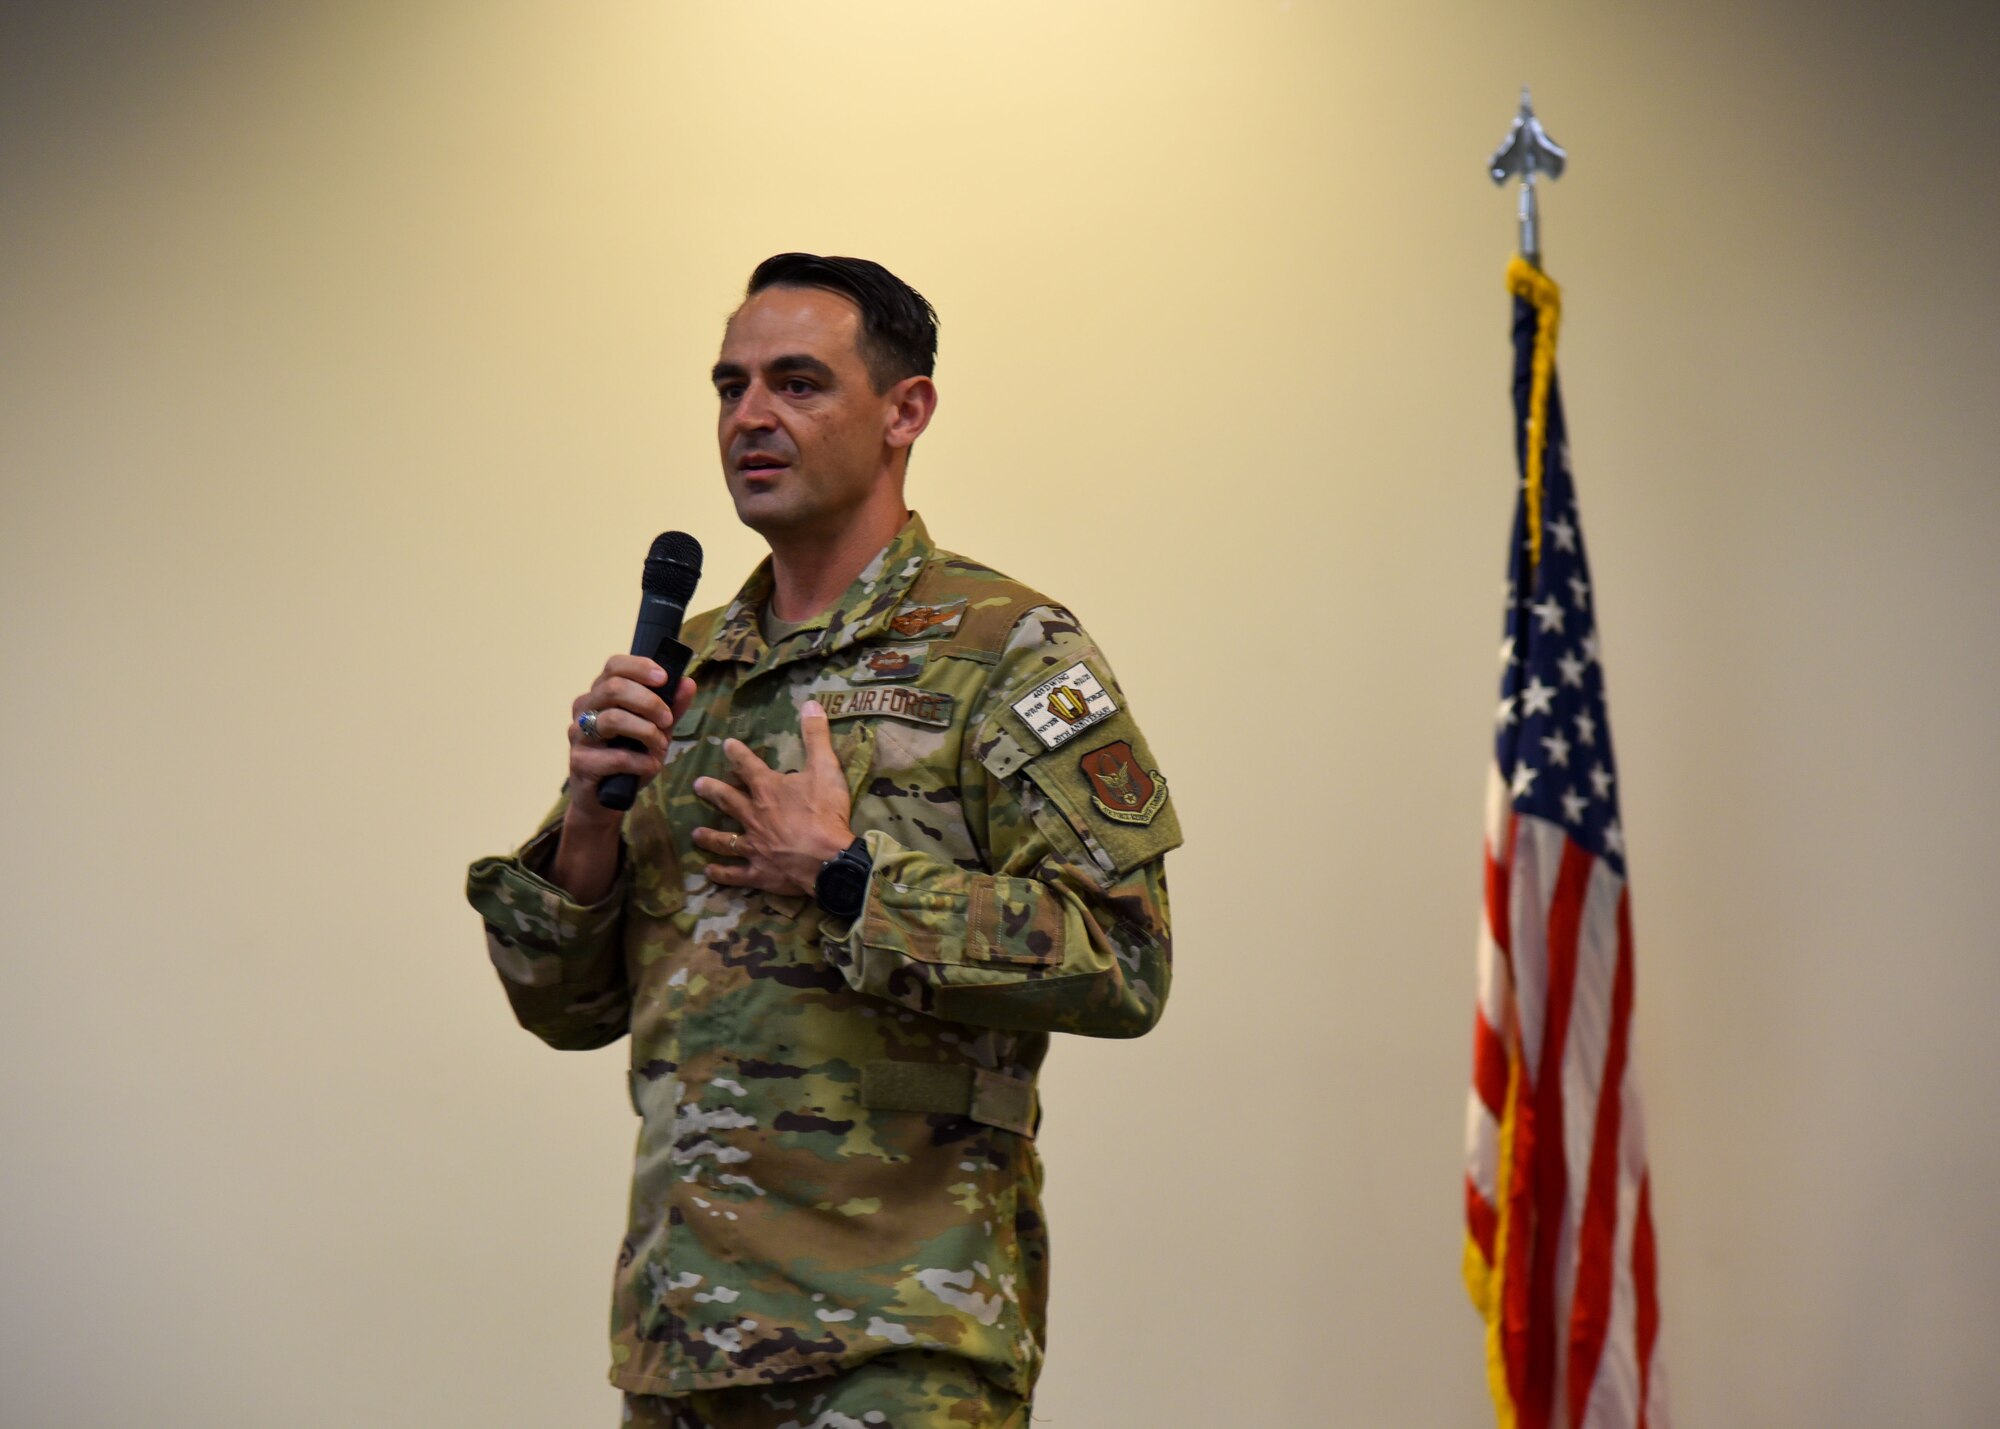 Col. Stuart M. Rubio, 403rd Wing commander, speaks during the commander’s call at Keesler Air Force Base, Miss., Sept. 12, 2021. Rubio spoke about topics including Covid-19 vaccination, and other important subjects. (Air Force photo by Tech. Sgt. Michael Farrar)